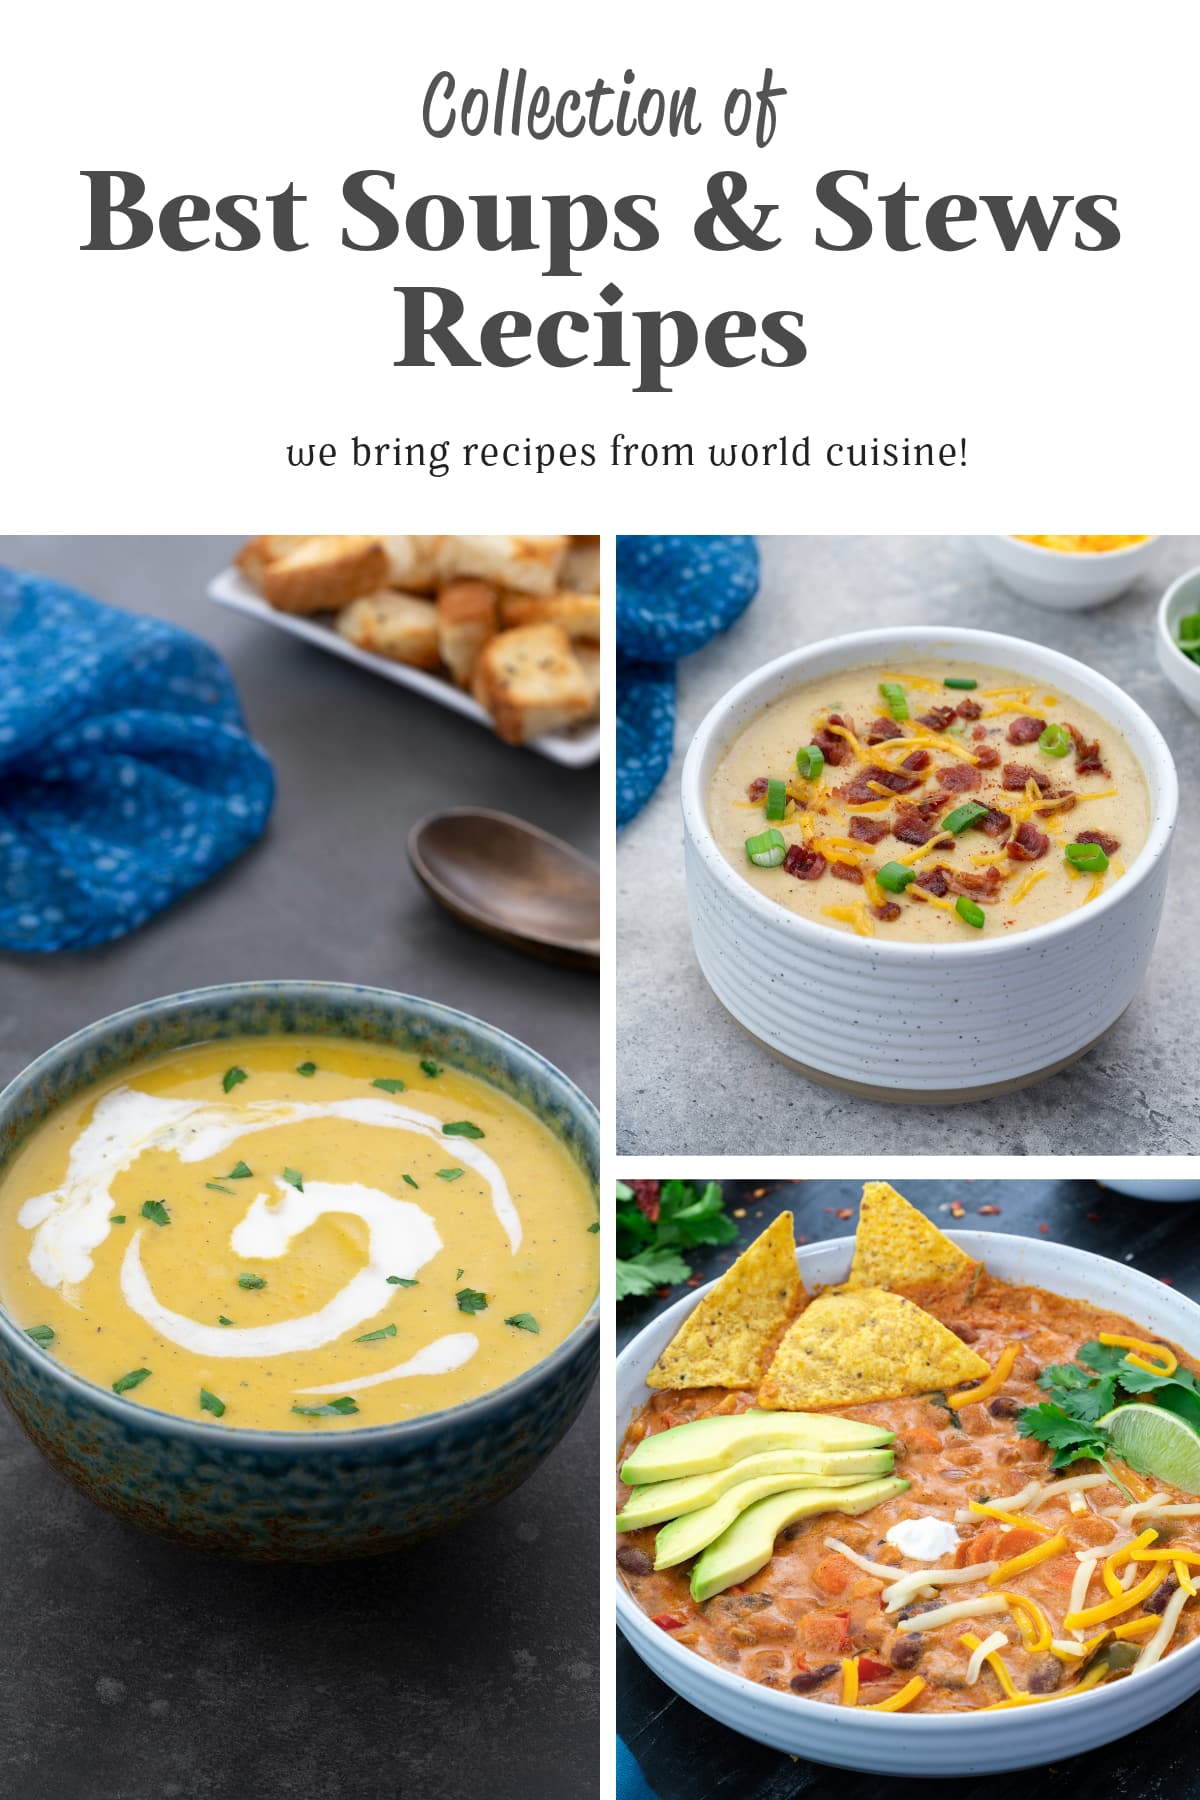 Collage of pumpkin soup, potato soup, and vegetarian chili dishes.